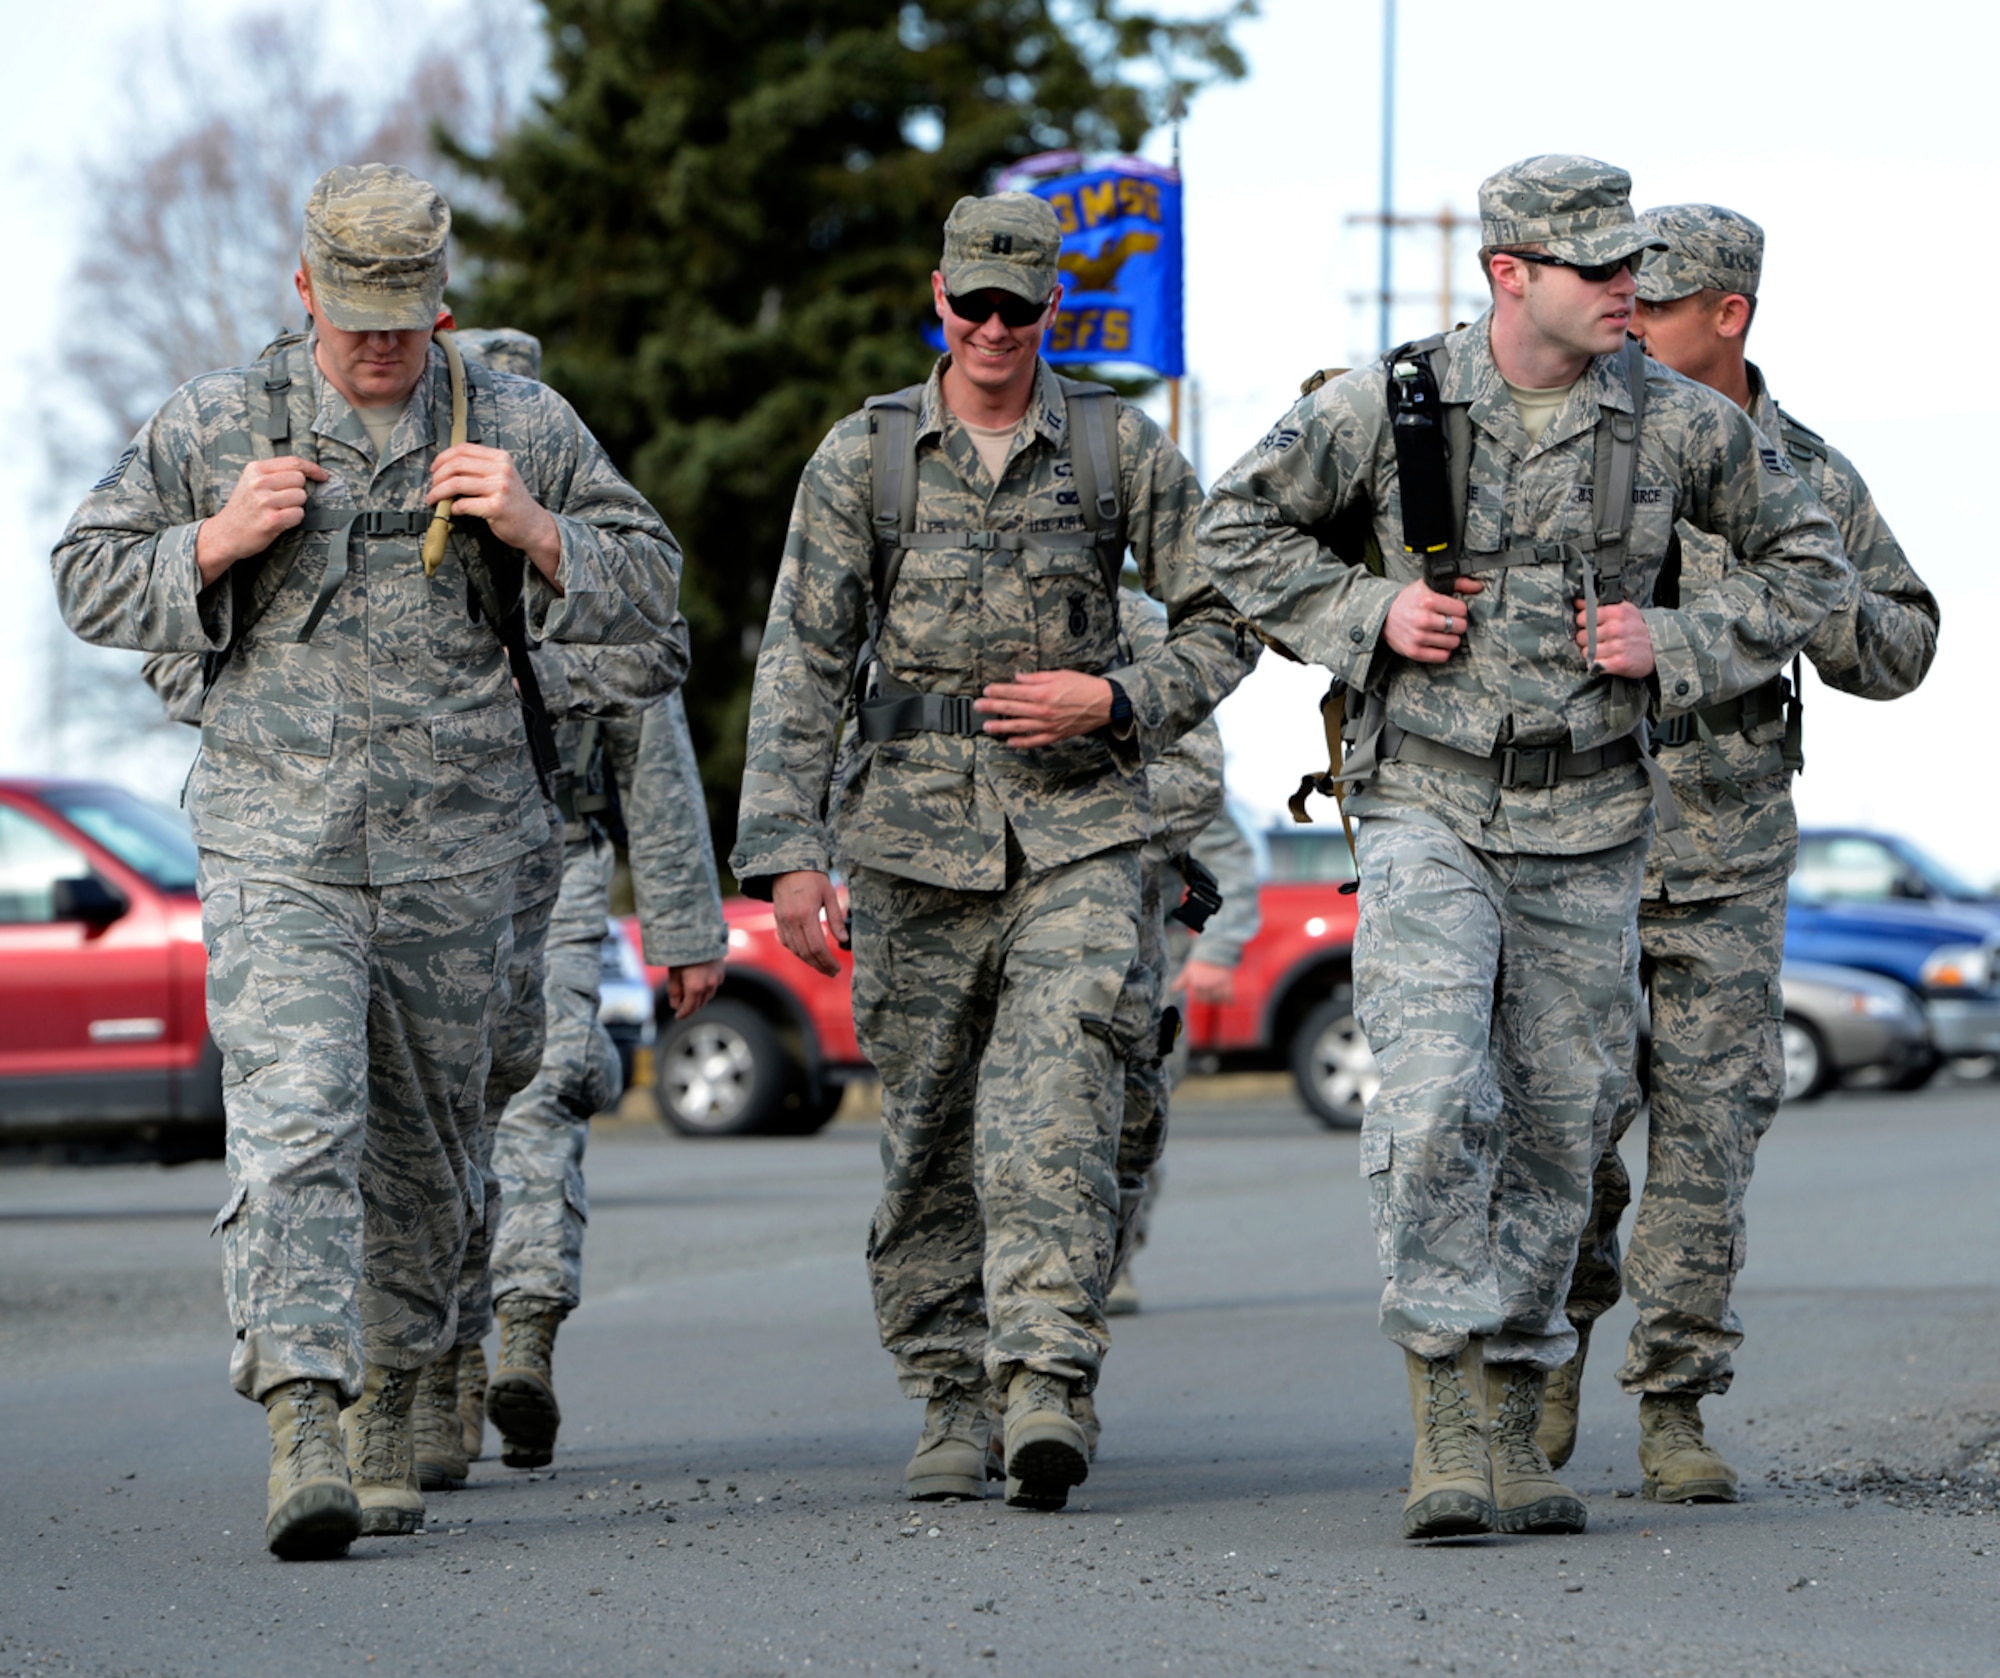 JOINT BASE ELMENDORF-RICHARDSON, Alaska-- Military members from the 673d Security Forces Squadron set out on a ruck march May 15 on Joint Base Elmendorf-Richardson. The ruck march is part of Police Week, which honors police officers, both military and civilian, who have sacrificed their lives in the line of duty. (U.S. Air Force photo/Airman 1st Class Tammie Ramsouer)